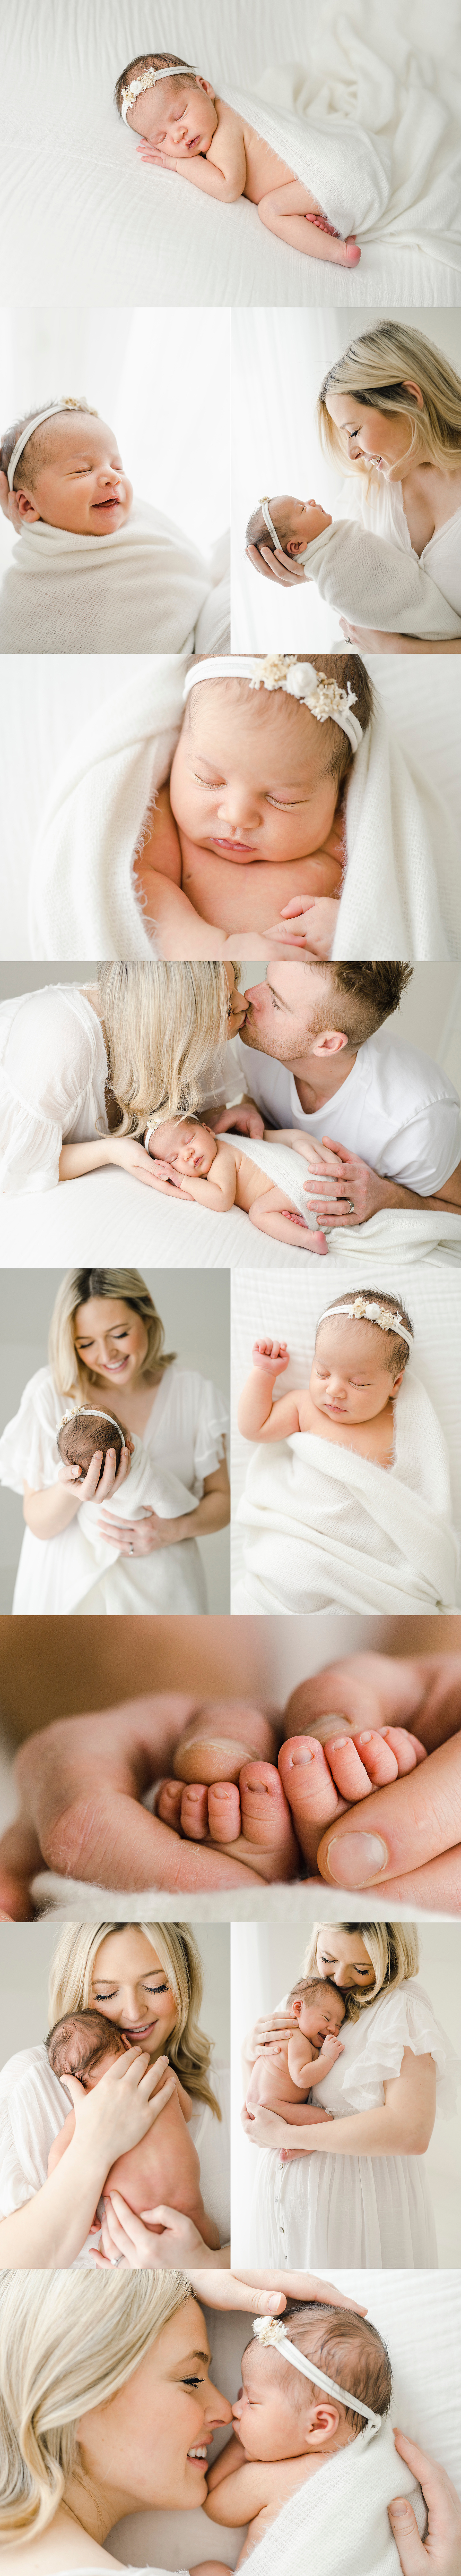 close cuddles and snuggles with newborn baby in niagara photography studio